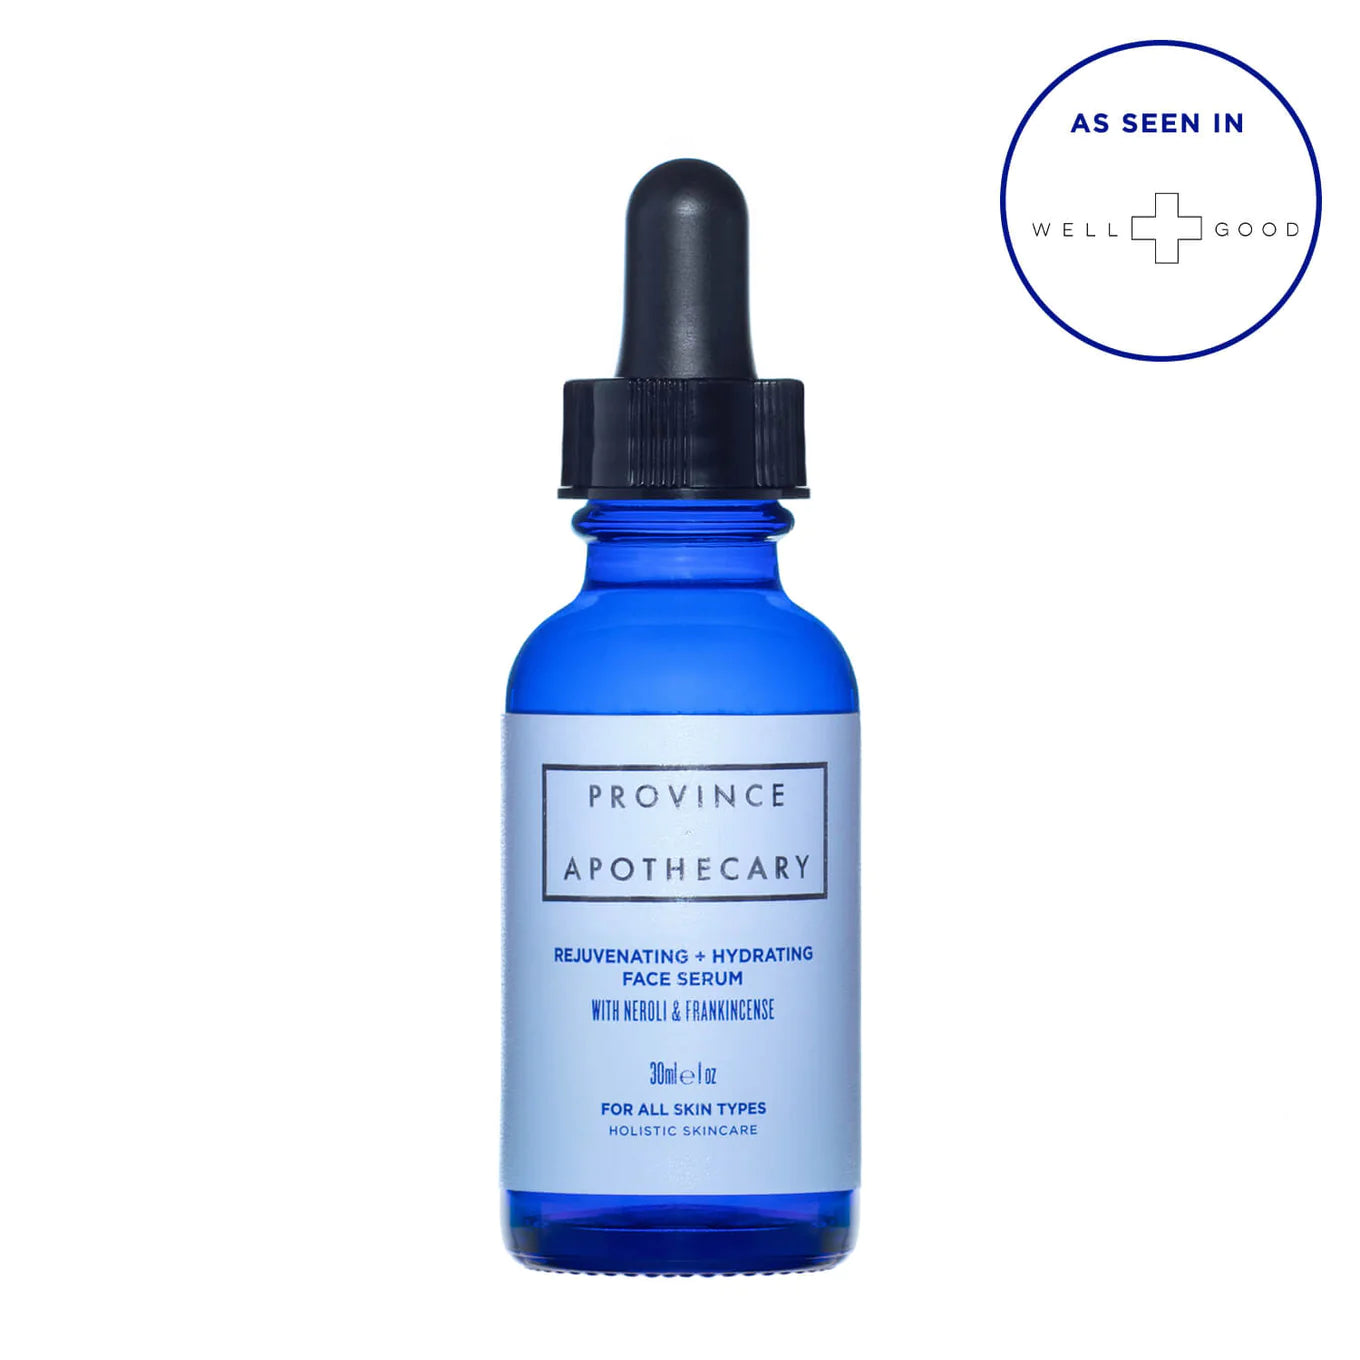 Province Apothecary Rejuvenating + Hydrating Face Serum 30ml